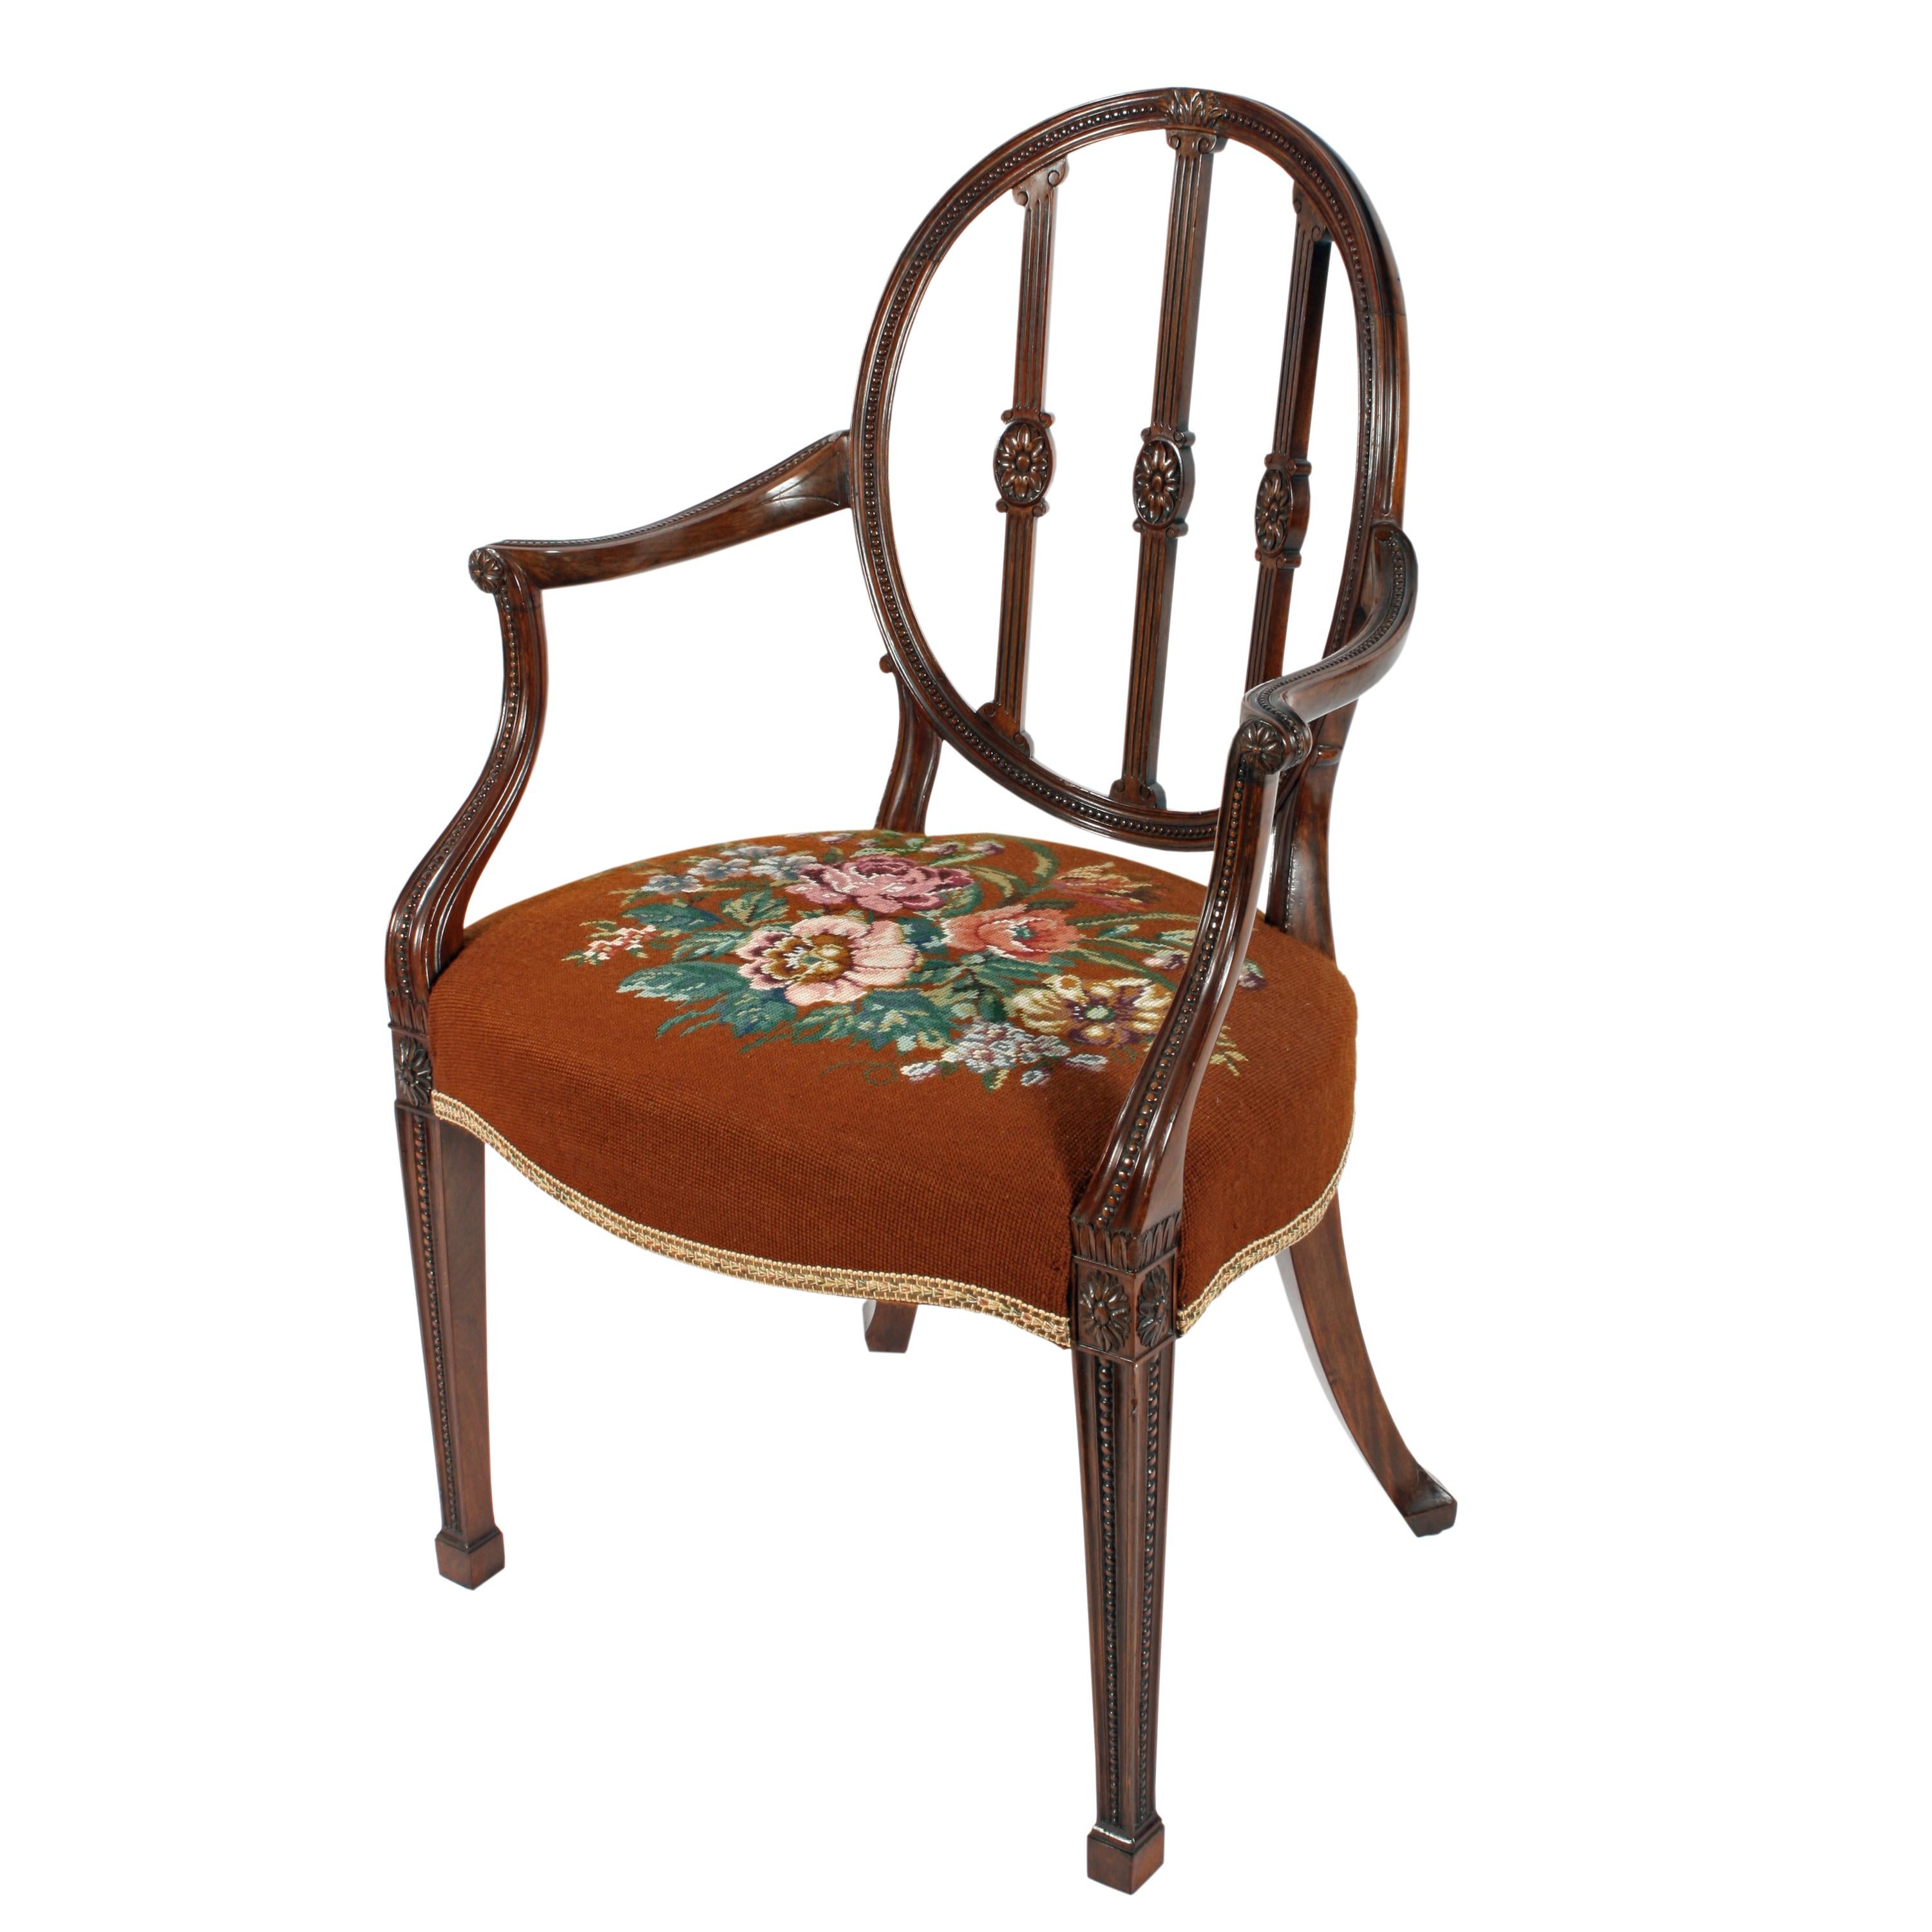 Hepplewhite design mahogany elbow chair

 

A Fine example of an Edwardian mahogany Hepplewhite design arm or elbow chair.

The chair has an oval back that is inset with 'Pea' carving, three upright spats that are fluted and have oval carved